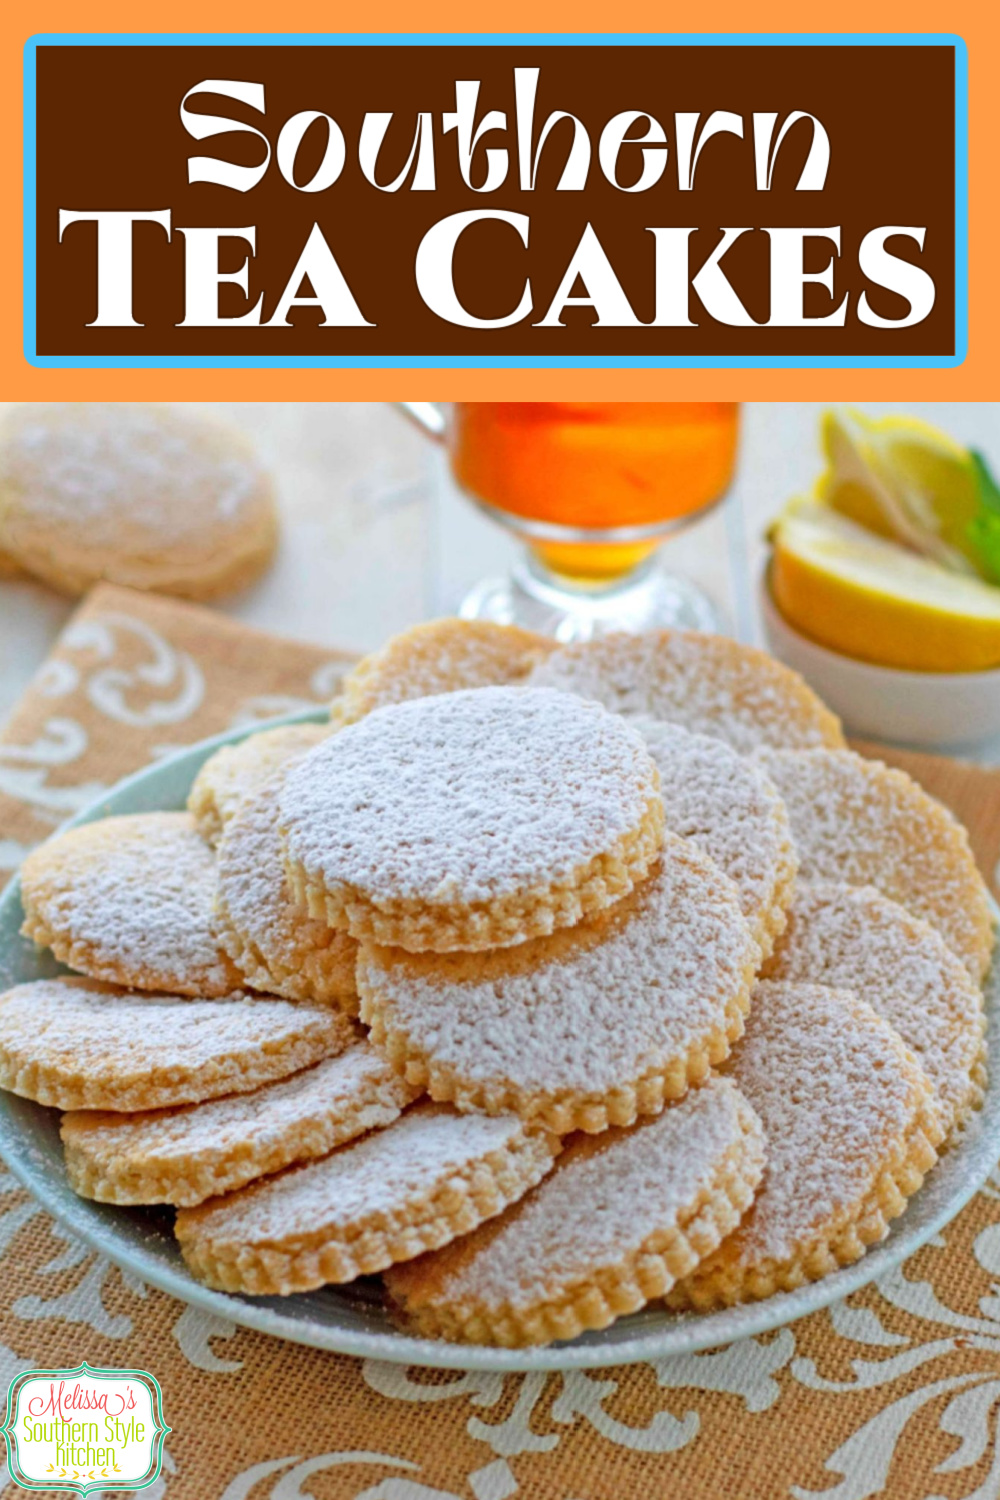 More like a cookie than a cake, these Southern Tea Cakes never disappoint #southernteacakes #shortbread #cakes #cakerecipes #teatime #southernfood #southerndesserts #holidaybaking #christmascookies #teacakes #easyrecipes #desserts #dessertfoodrecipes via @melissasssk